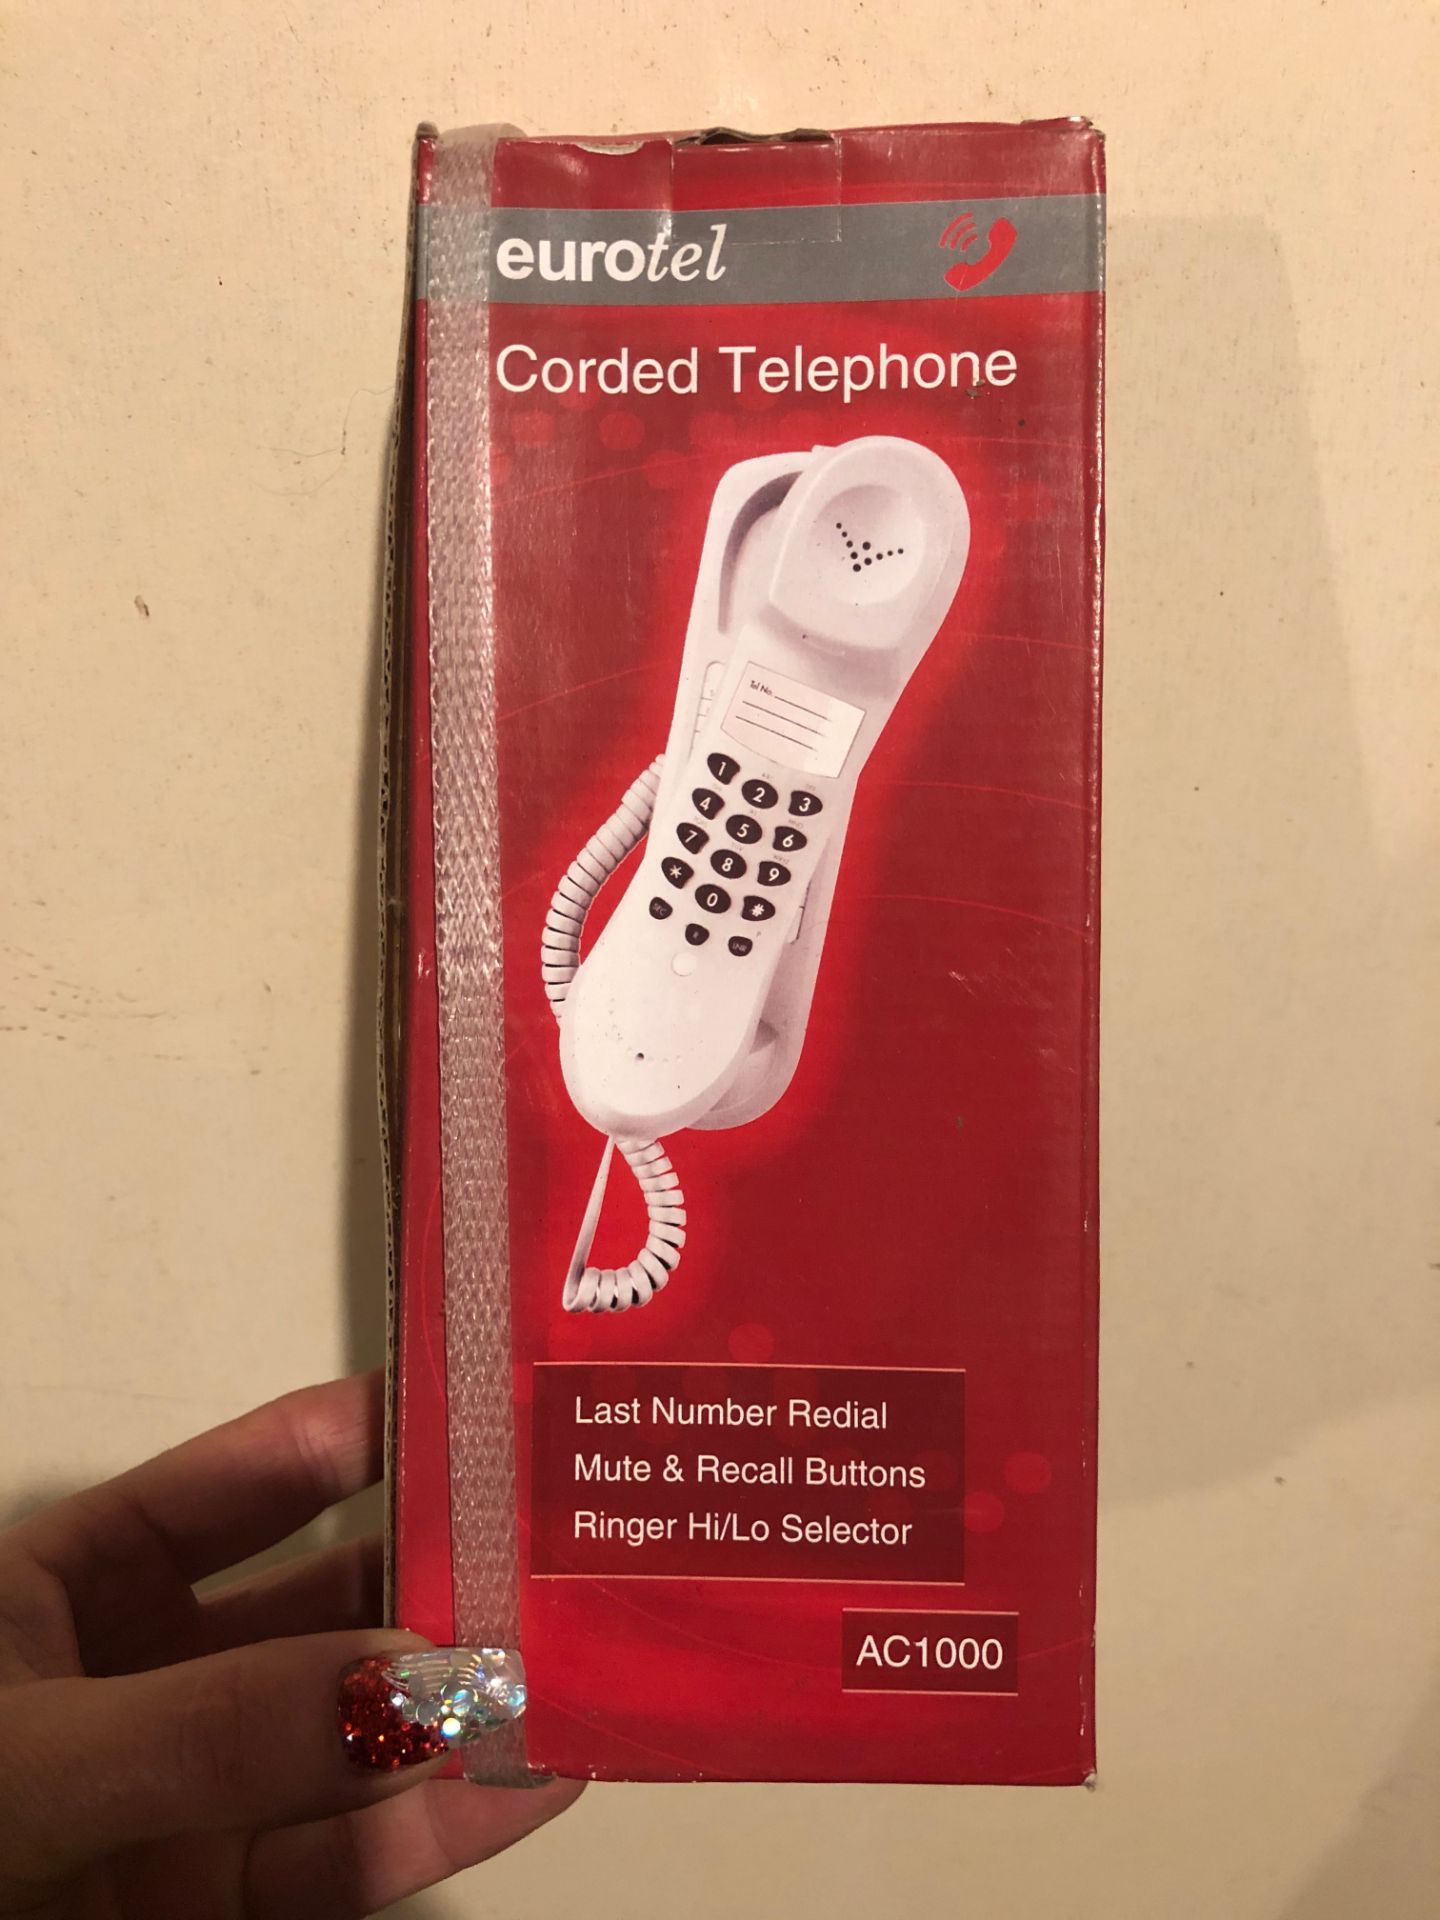 EUROTEL CORDED PHONE NOT USED STILL IN THE BOX BUT BOX DAMAGED